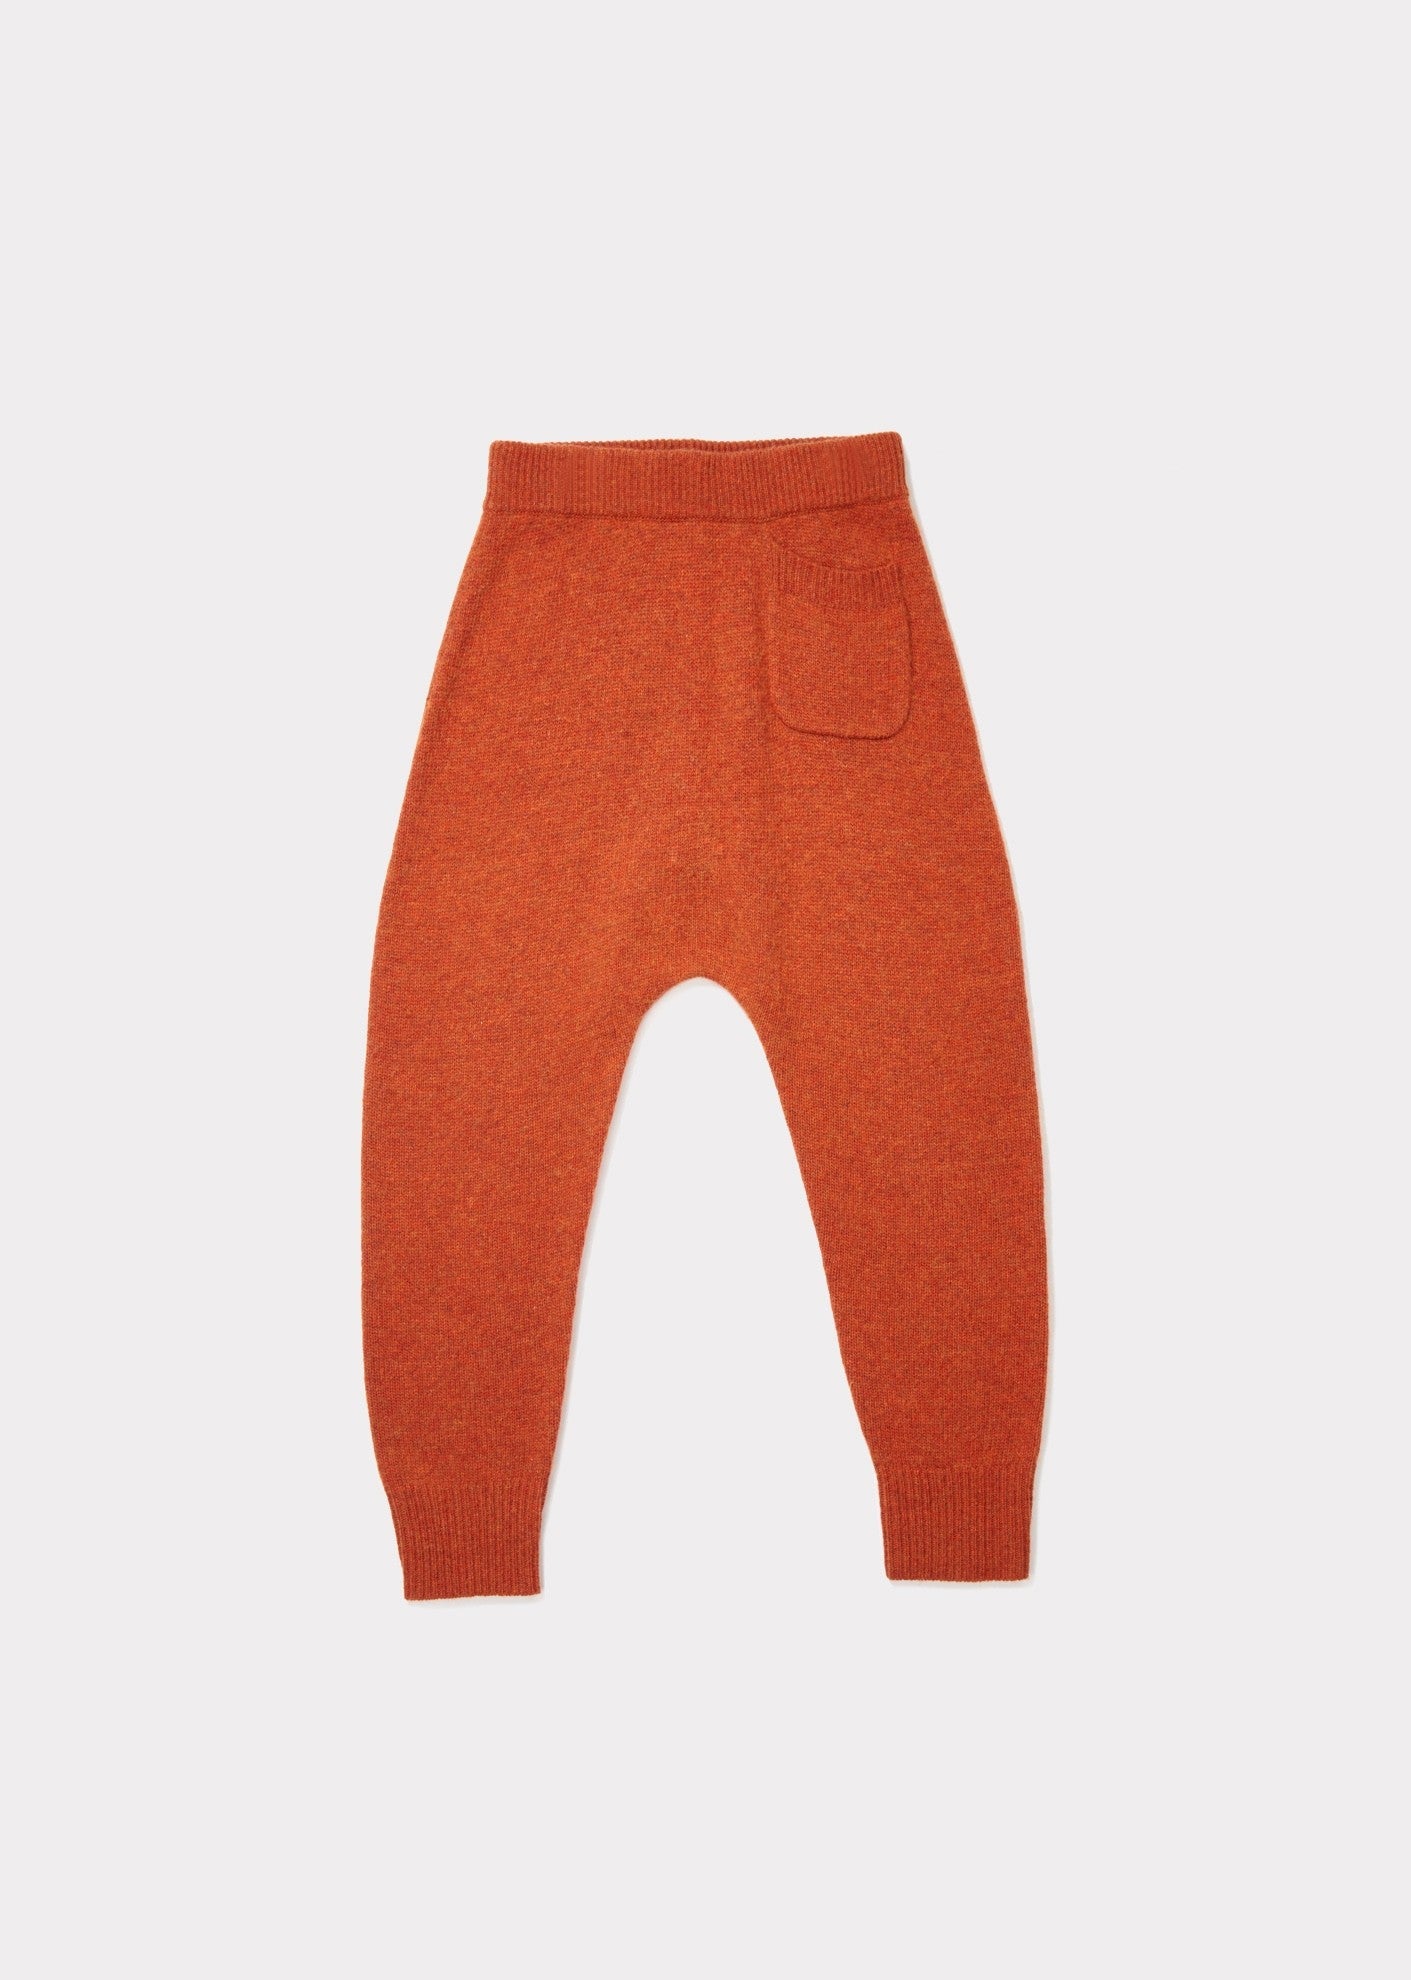 Girls Red Knitted Trousers